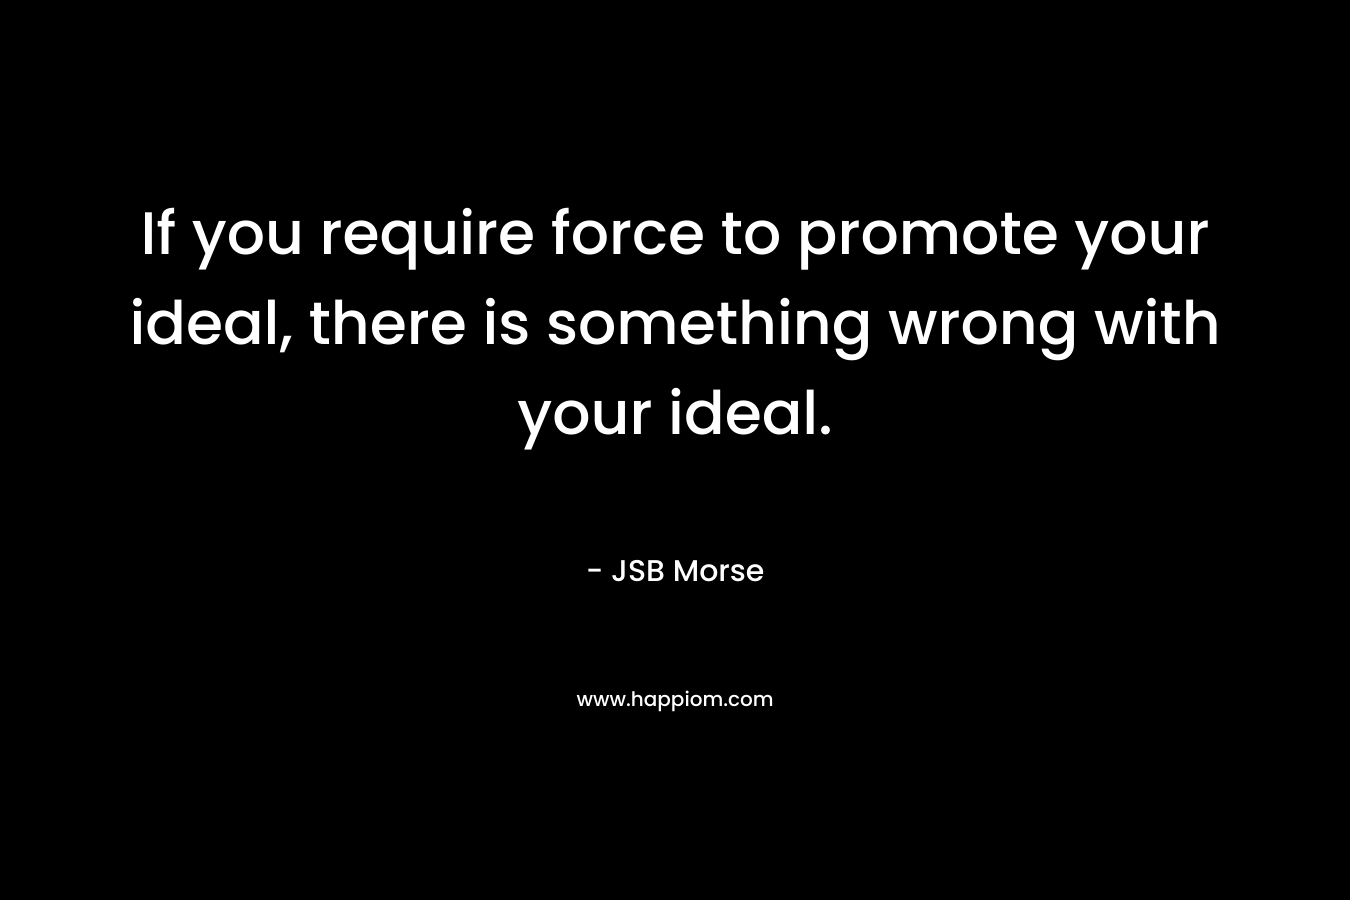 If you require force to promote your ideal, there is something wrong with your ideal.